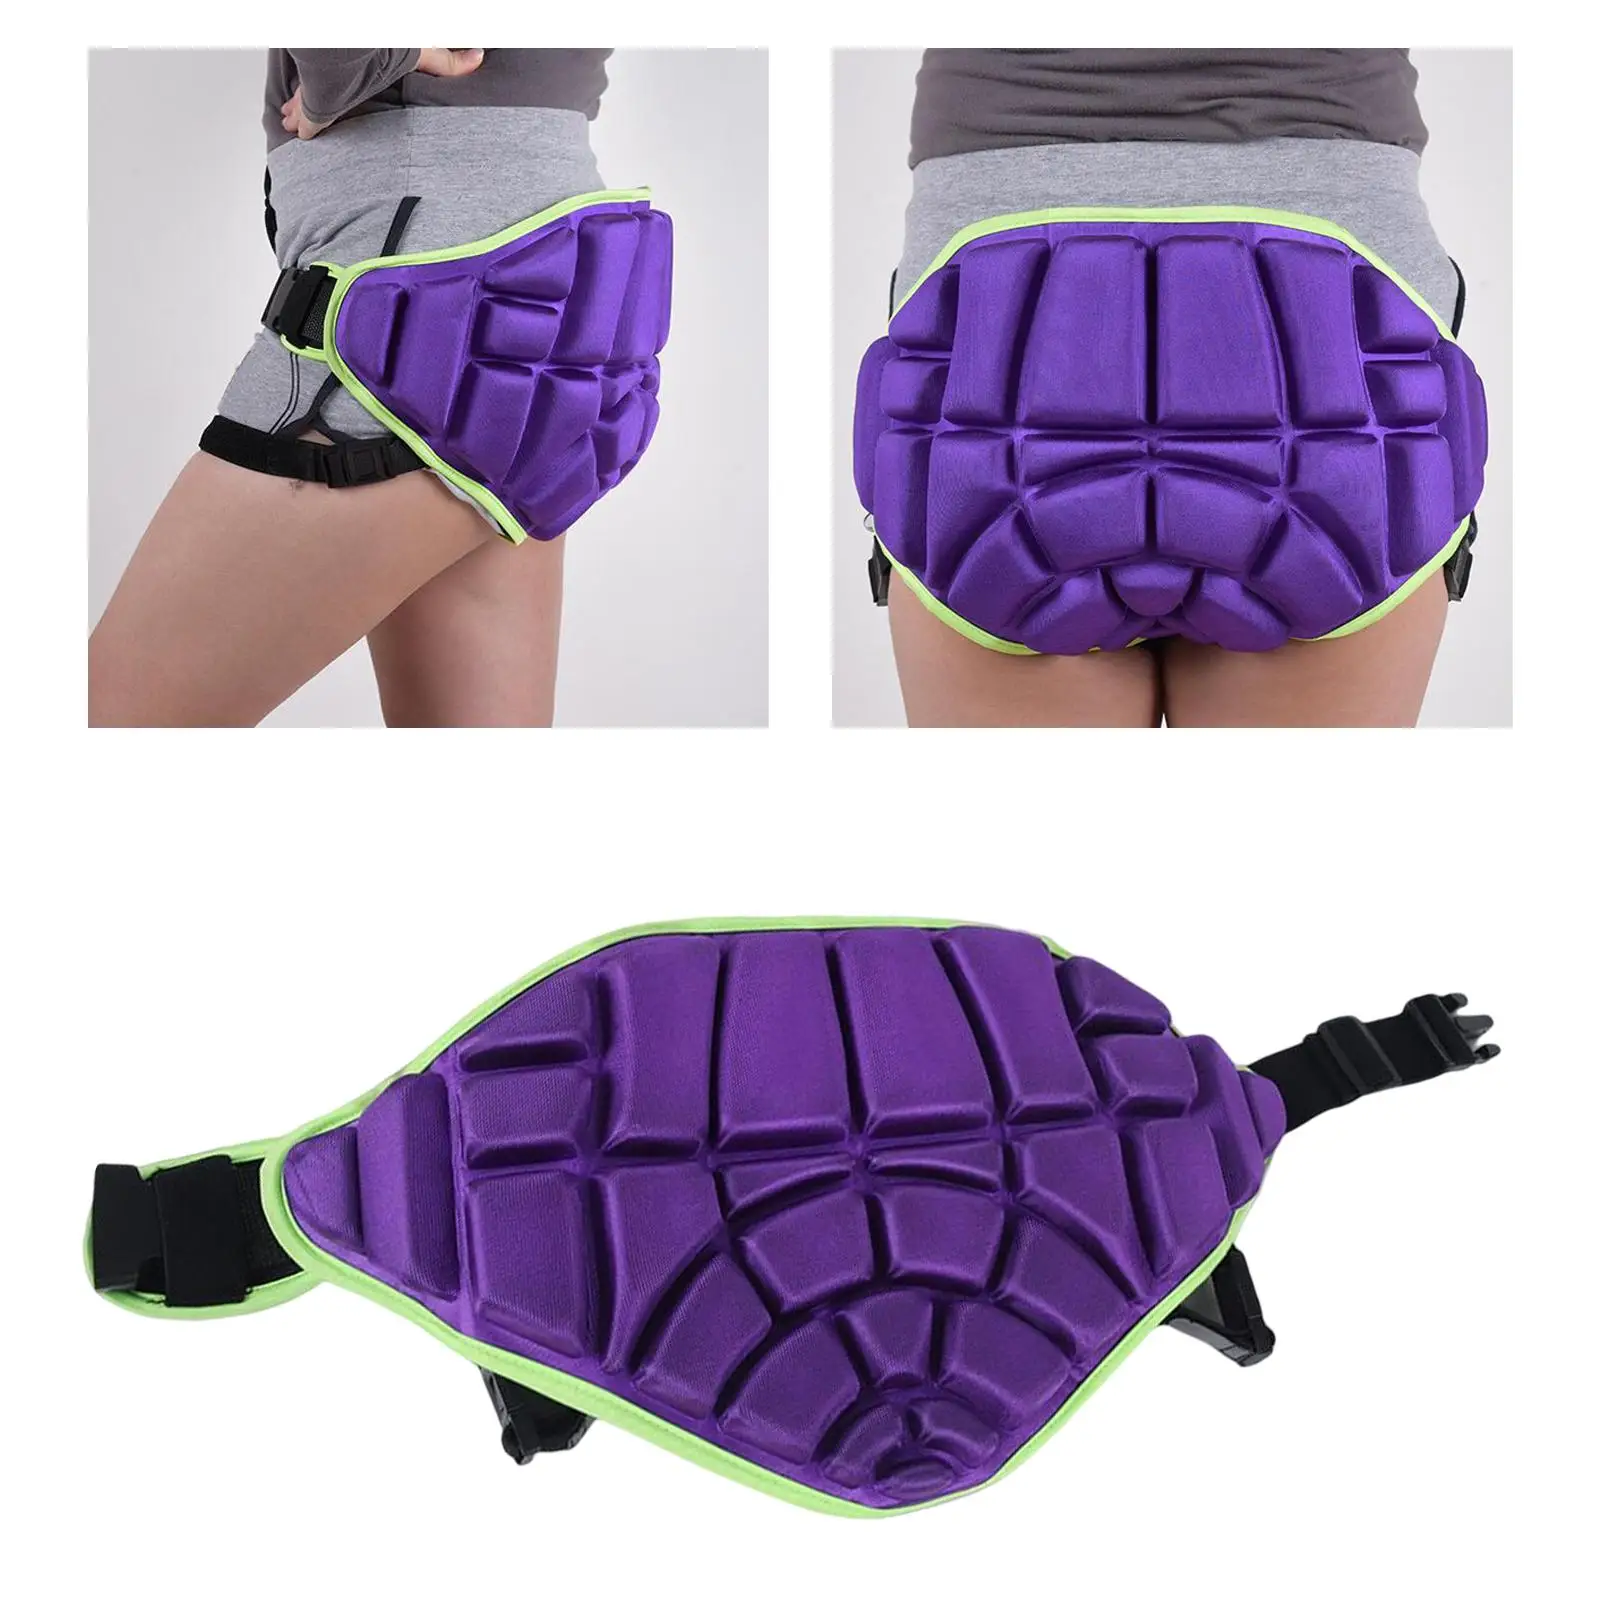 Soft Adult/Kids Butt Hip Pad Anti Slip Full Protection Lightweight Hip Butt Guard with Buckle Butt Pad for Skateboarding Ski